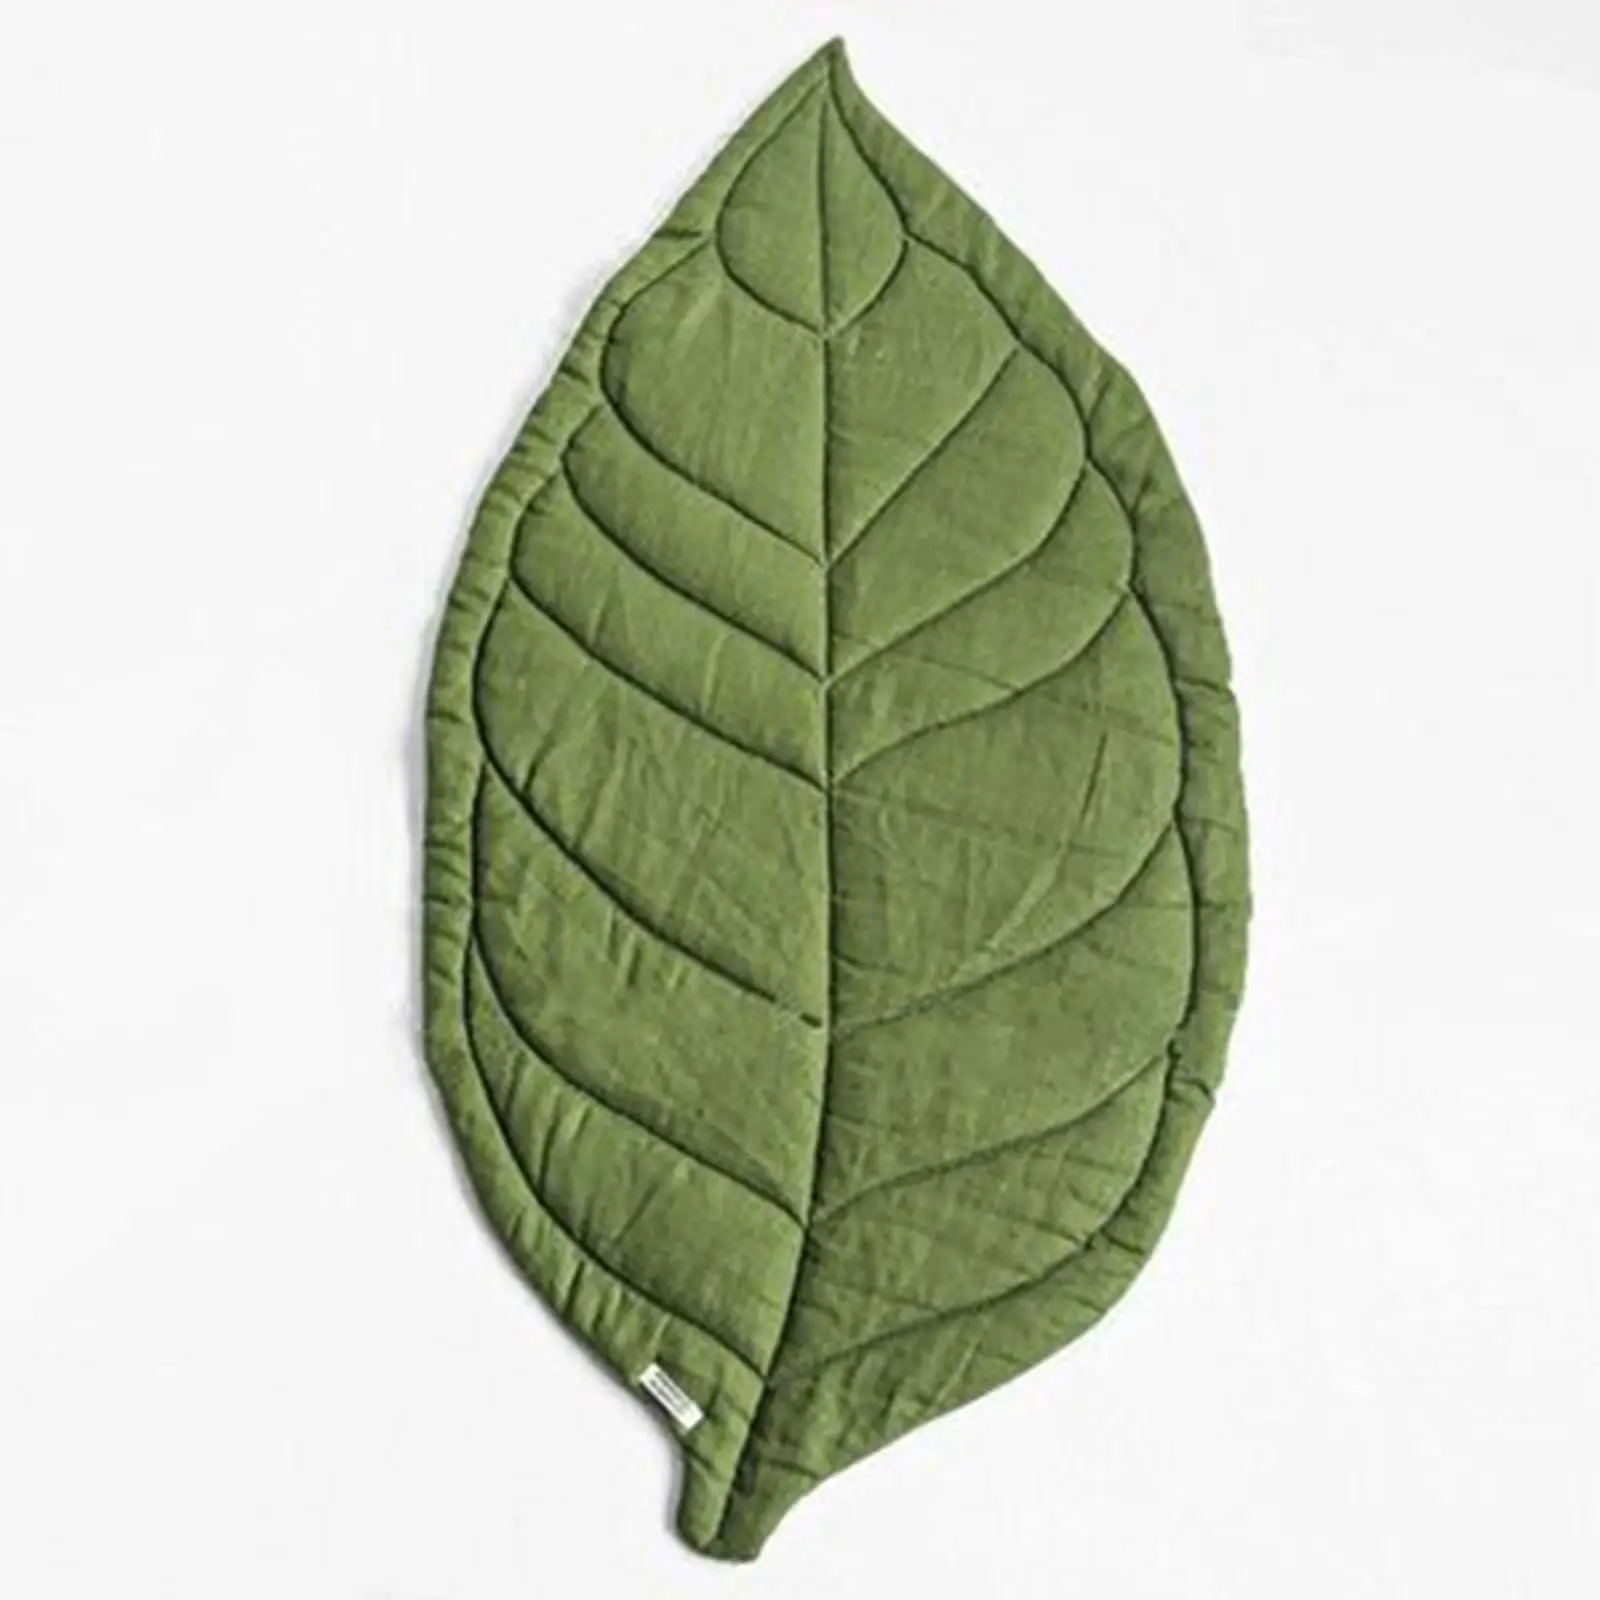 Nordic Cotton Baby Play Crawling Mat Tree Leaf Shape Comfortable Game Carpet Floor Blanket Playmat Photography Props